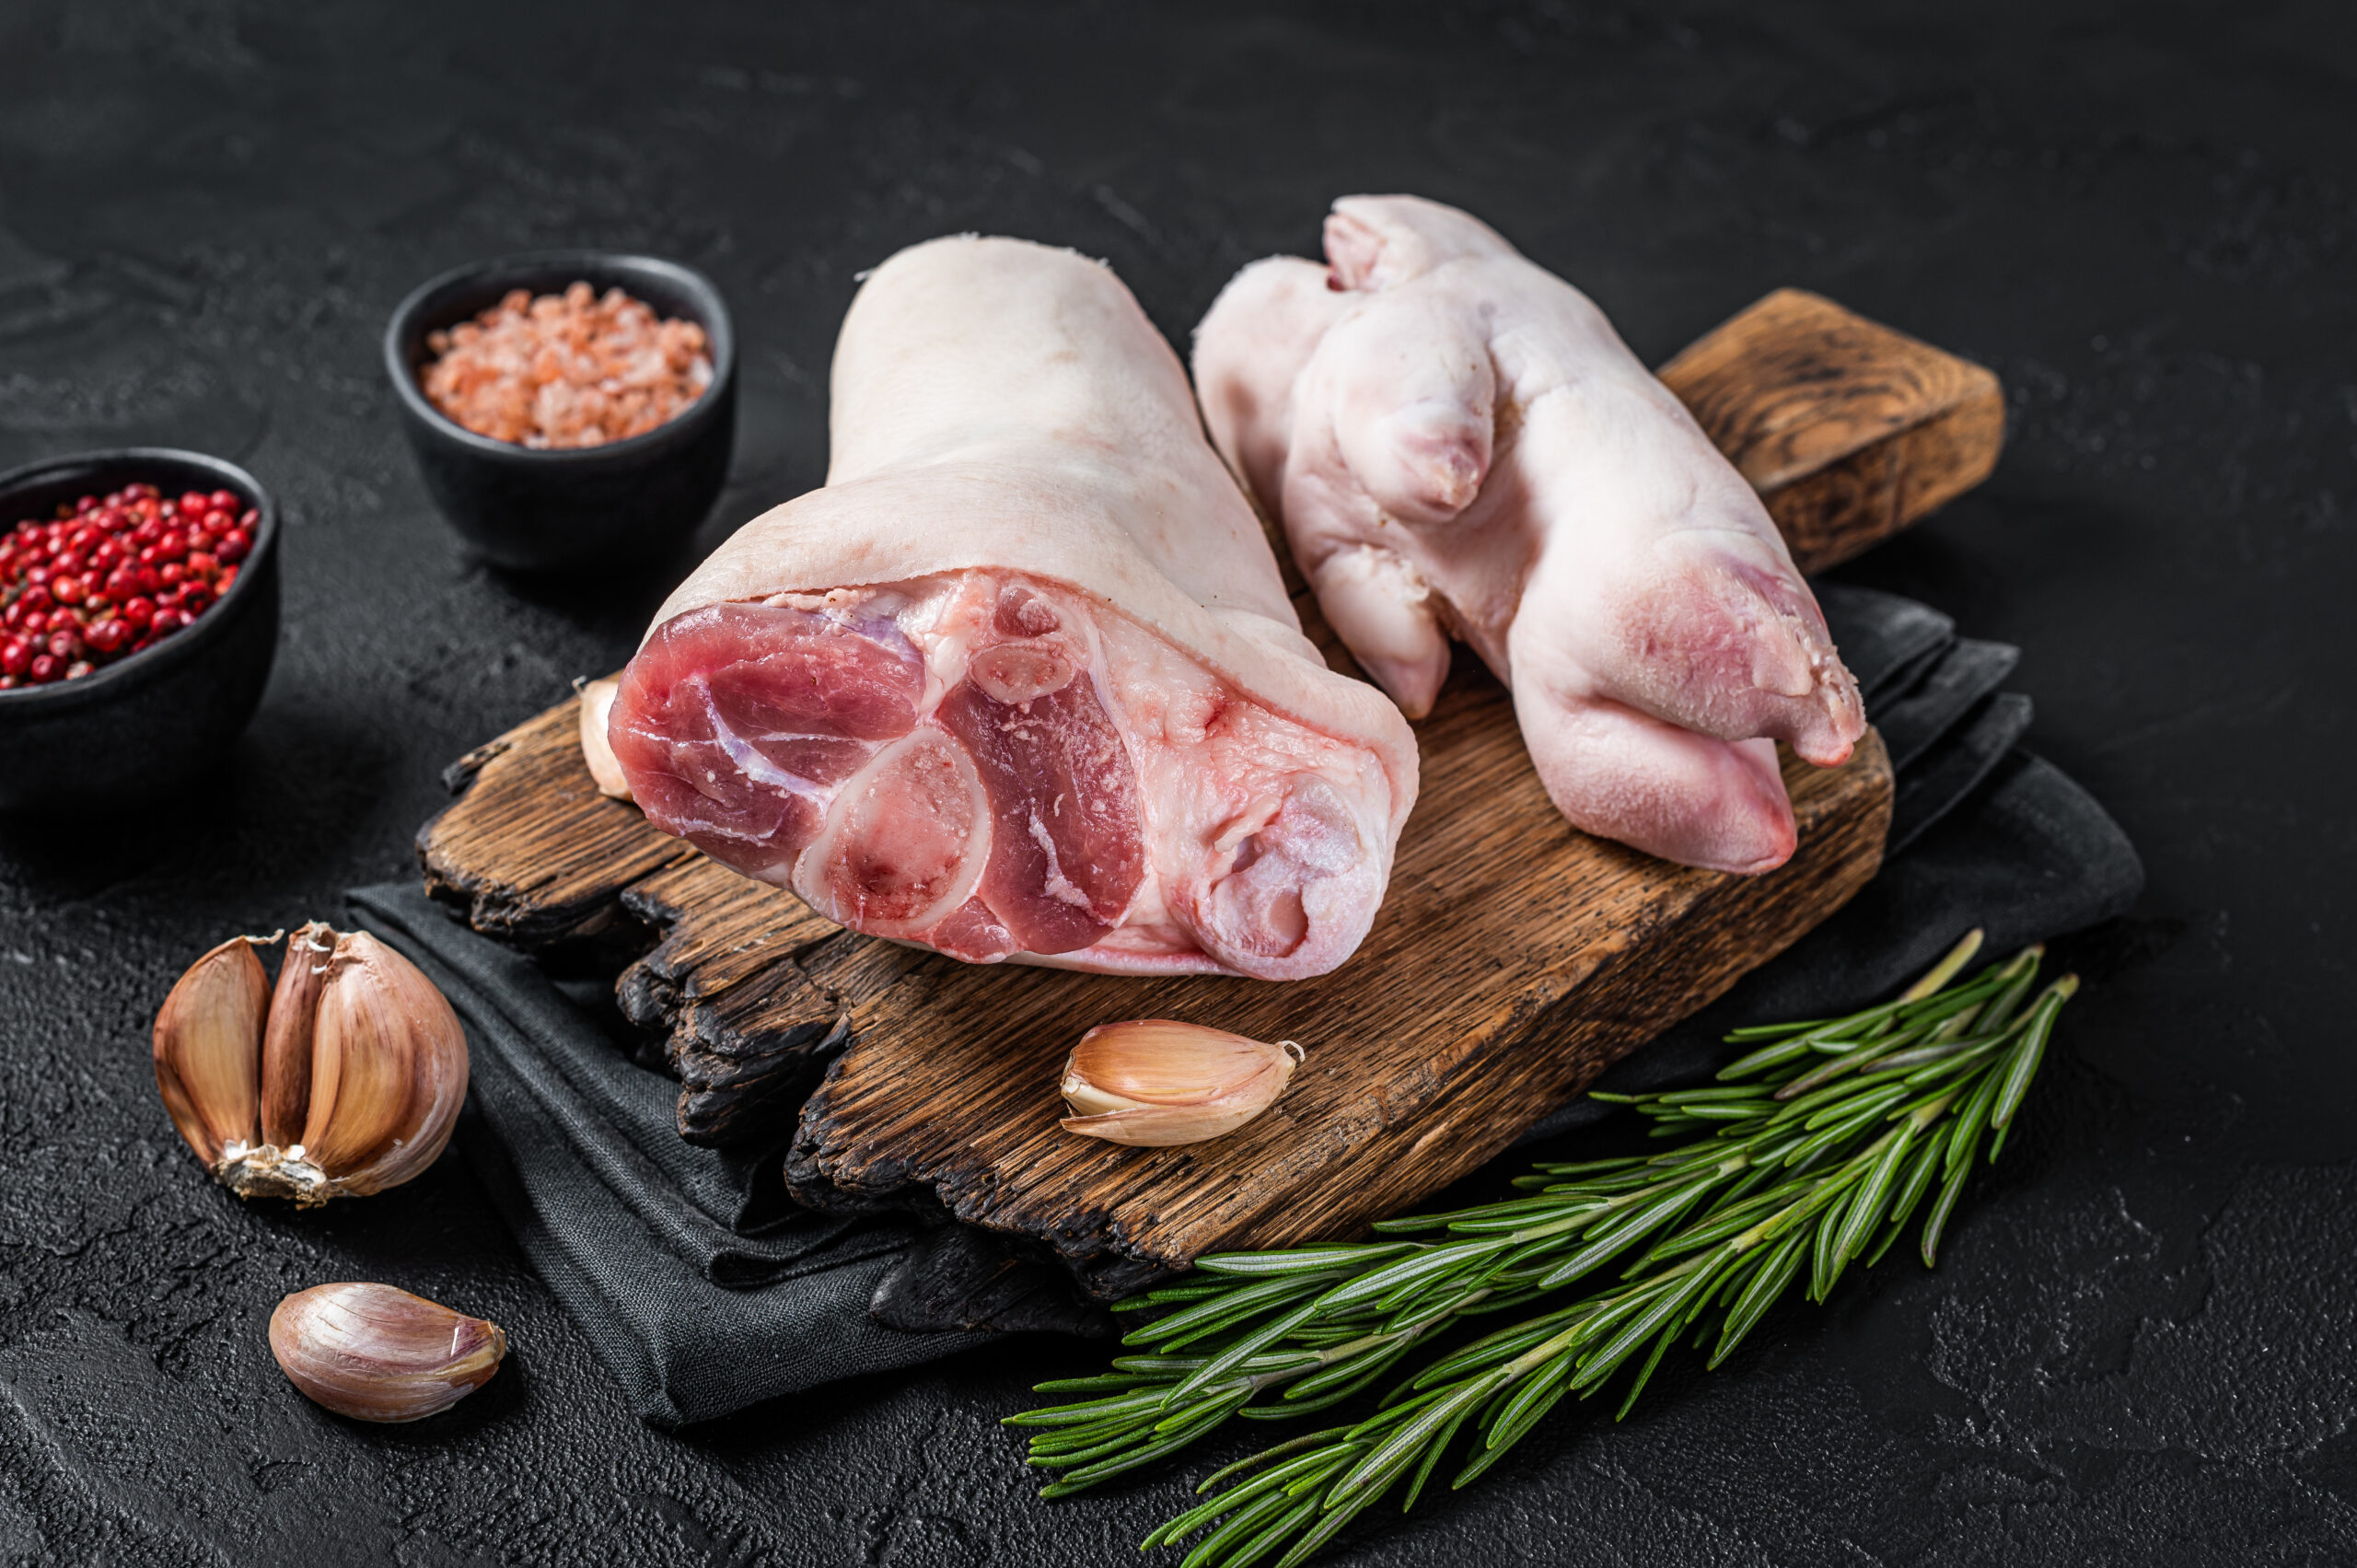 Raw pork knuckle or hoof, feet on a cutting board. Black background. Top view